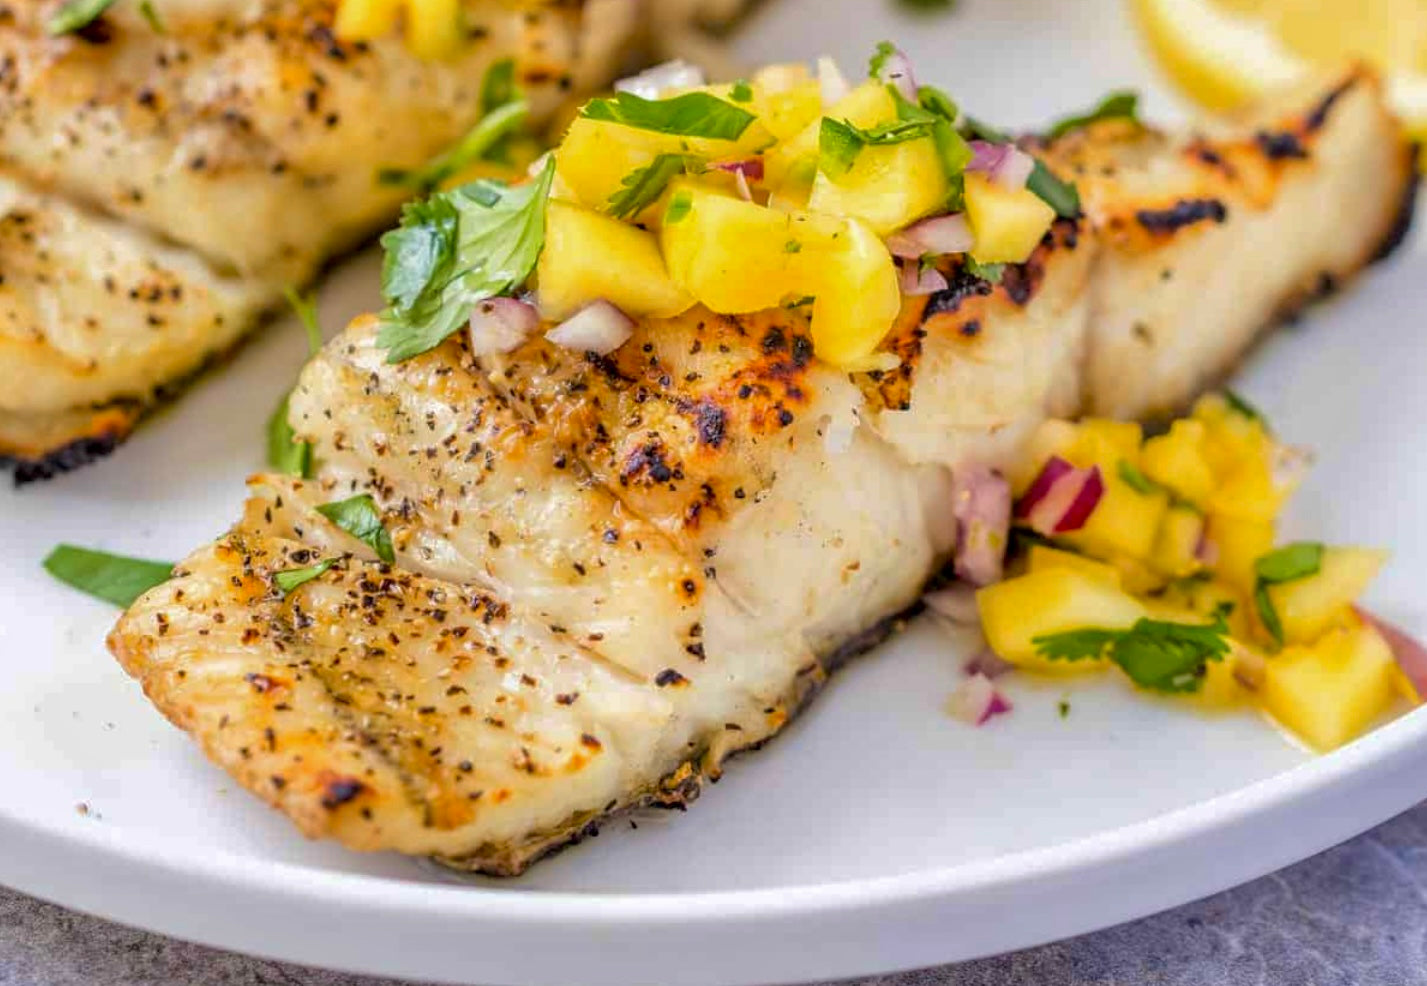 Grilled Halibut with Mango Salsa: A Healthy and Delicious BBQ Fish Recipe